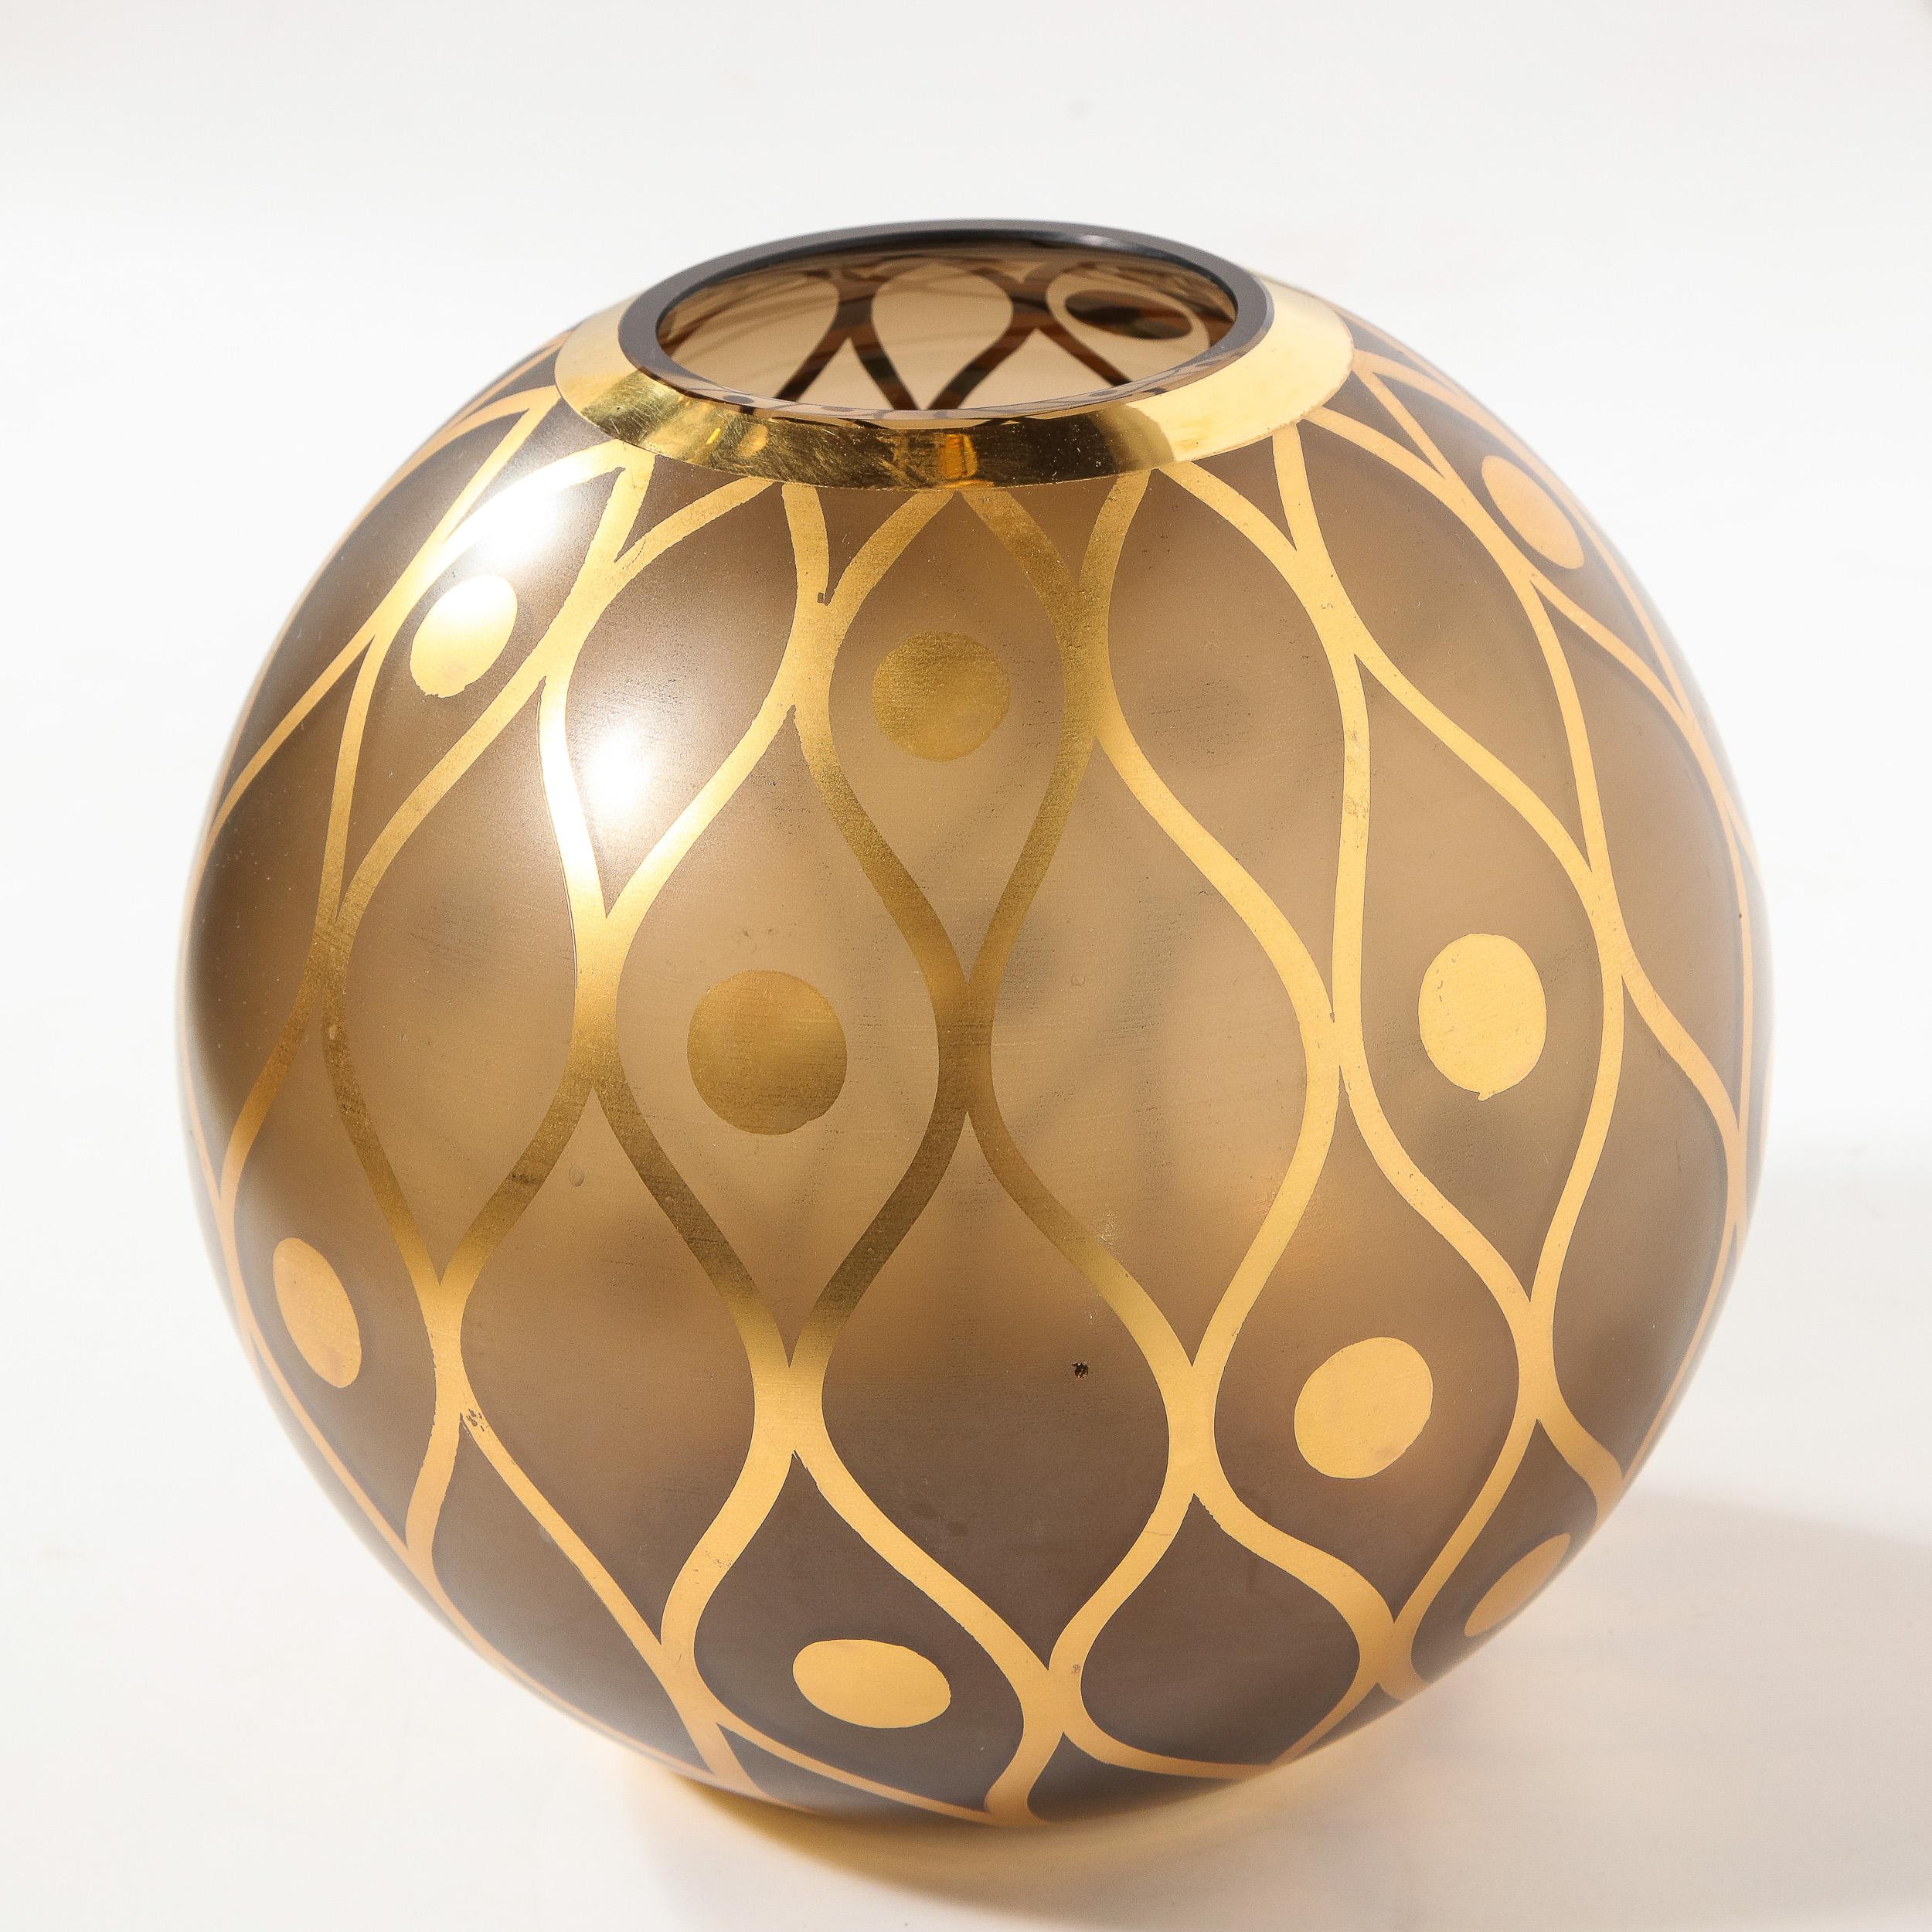 Mid-20th Century Mid-Century Modern Spherical Smoked Glass Vase with Curvilinear Gilded Detailing